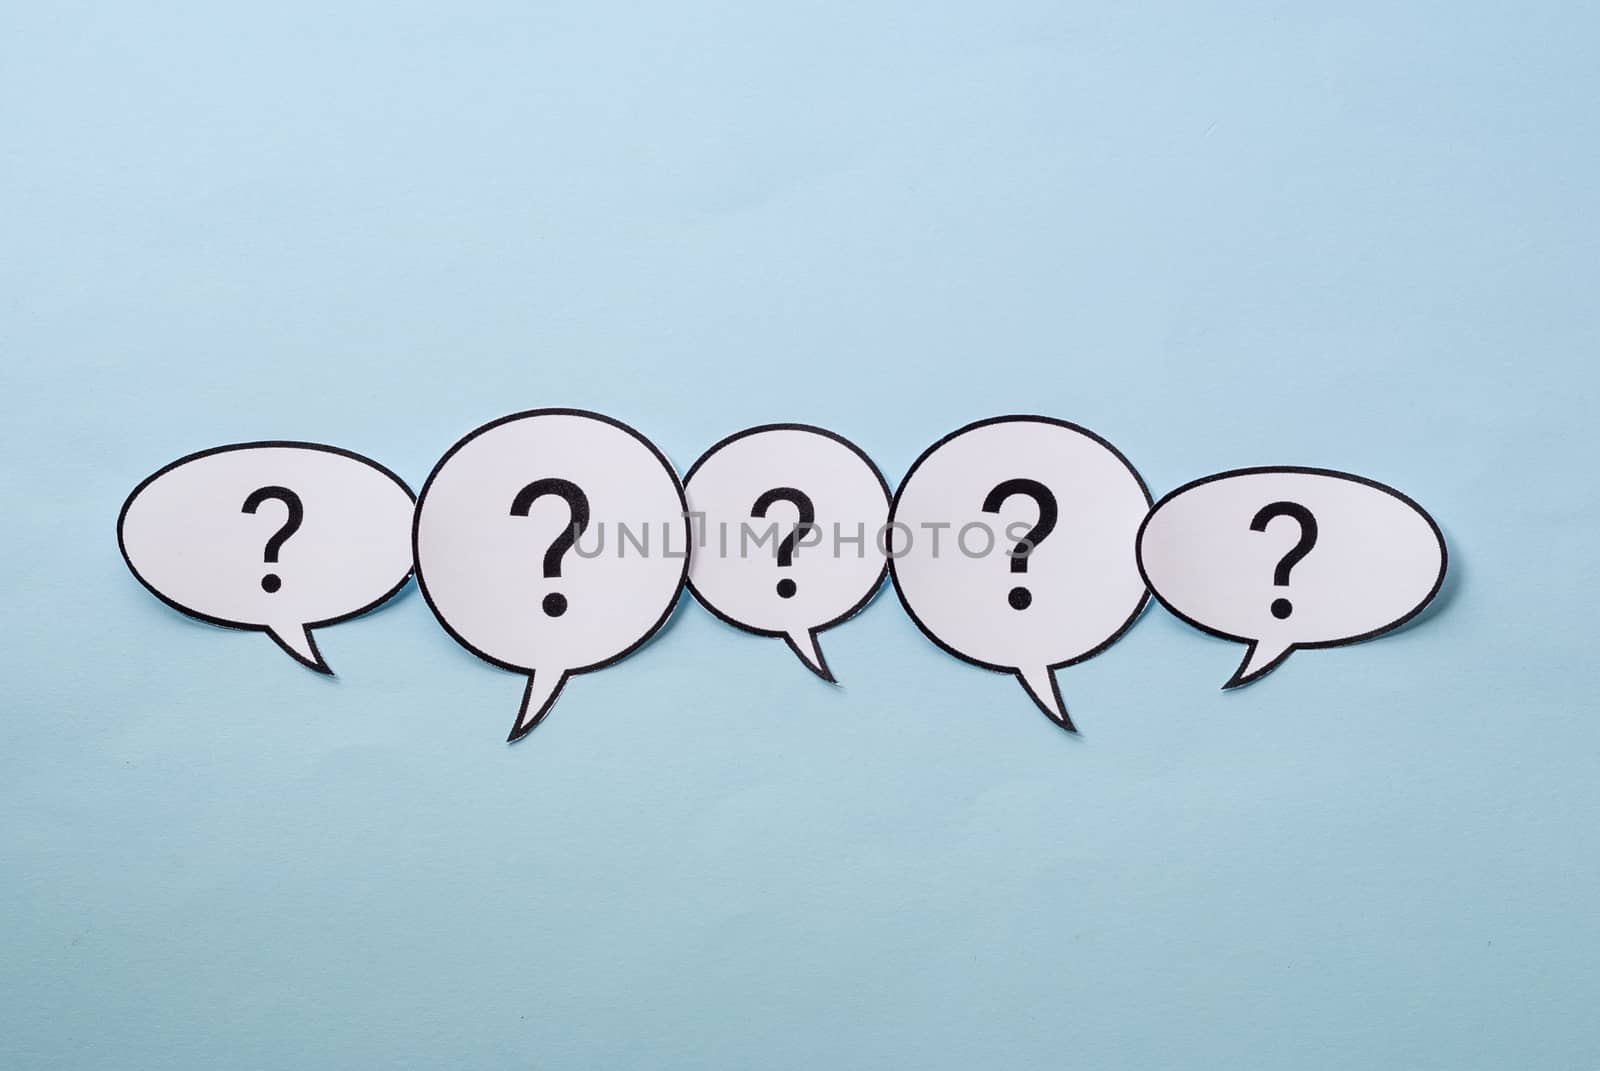 Line of question marks in speech bubbles of assorted shapes over a blue background with copy space above and below